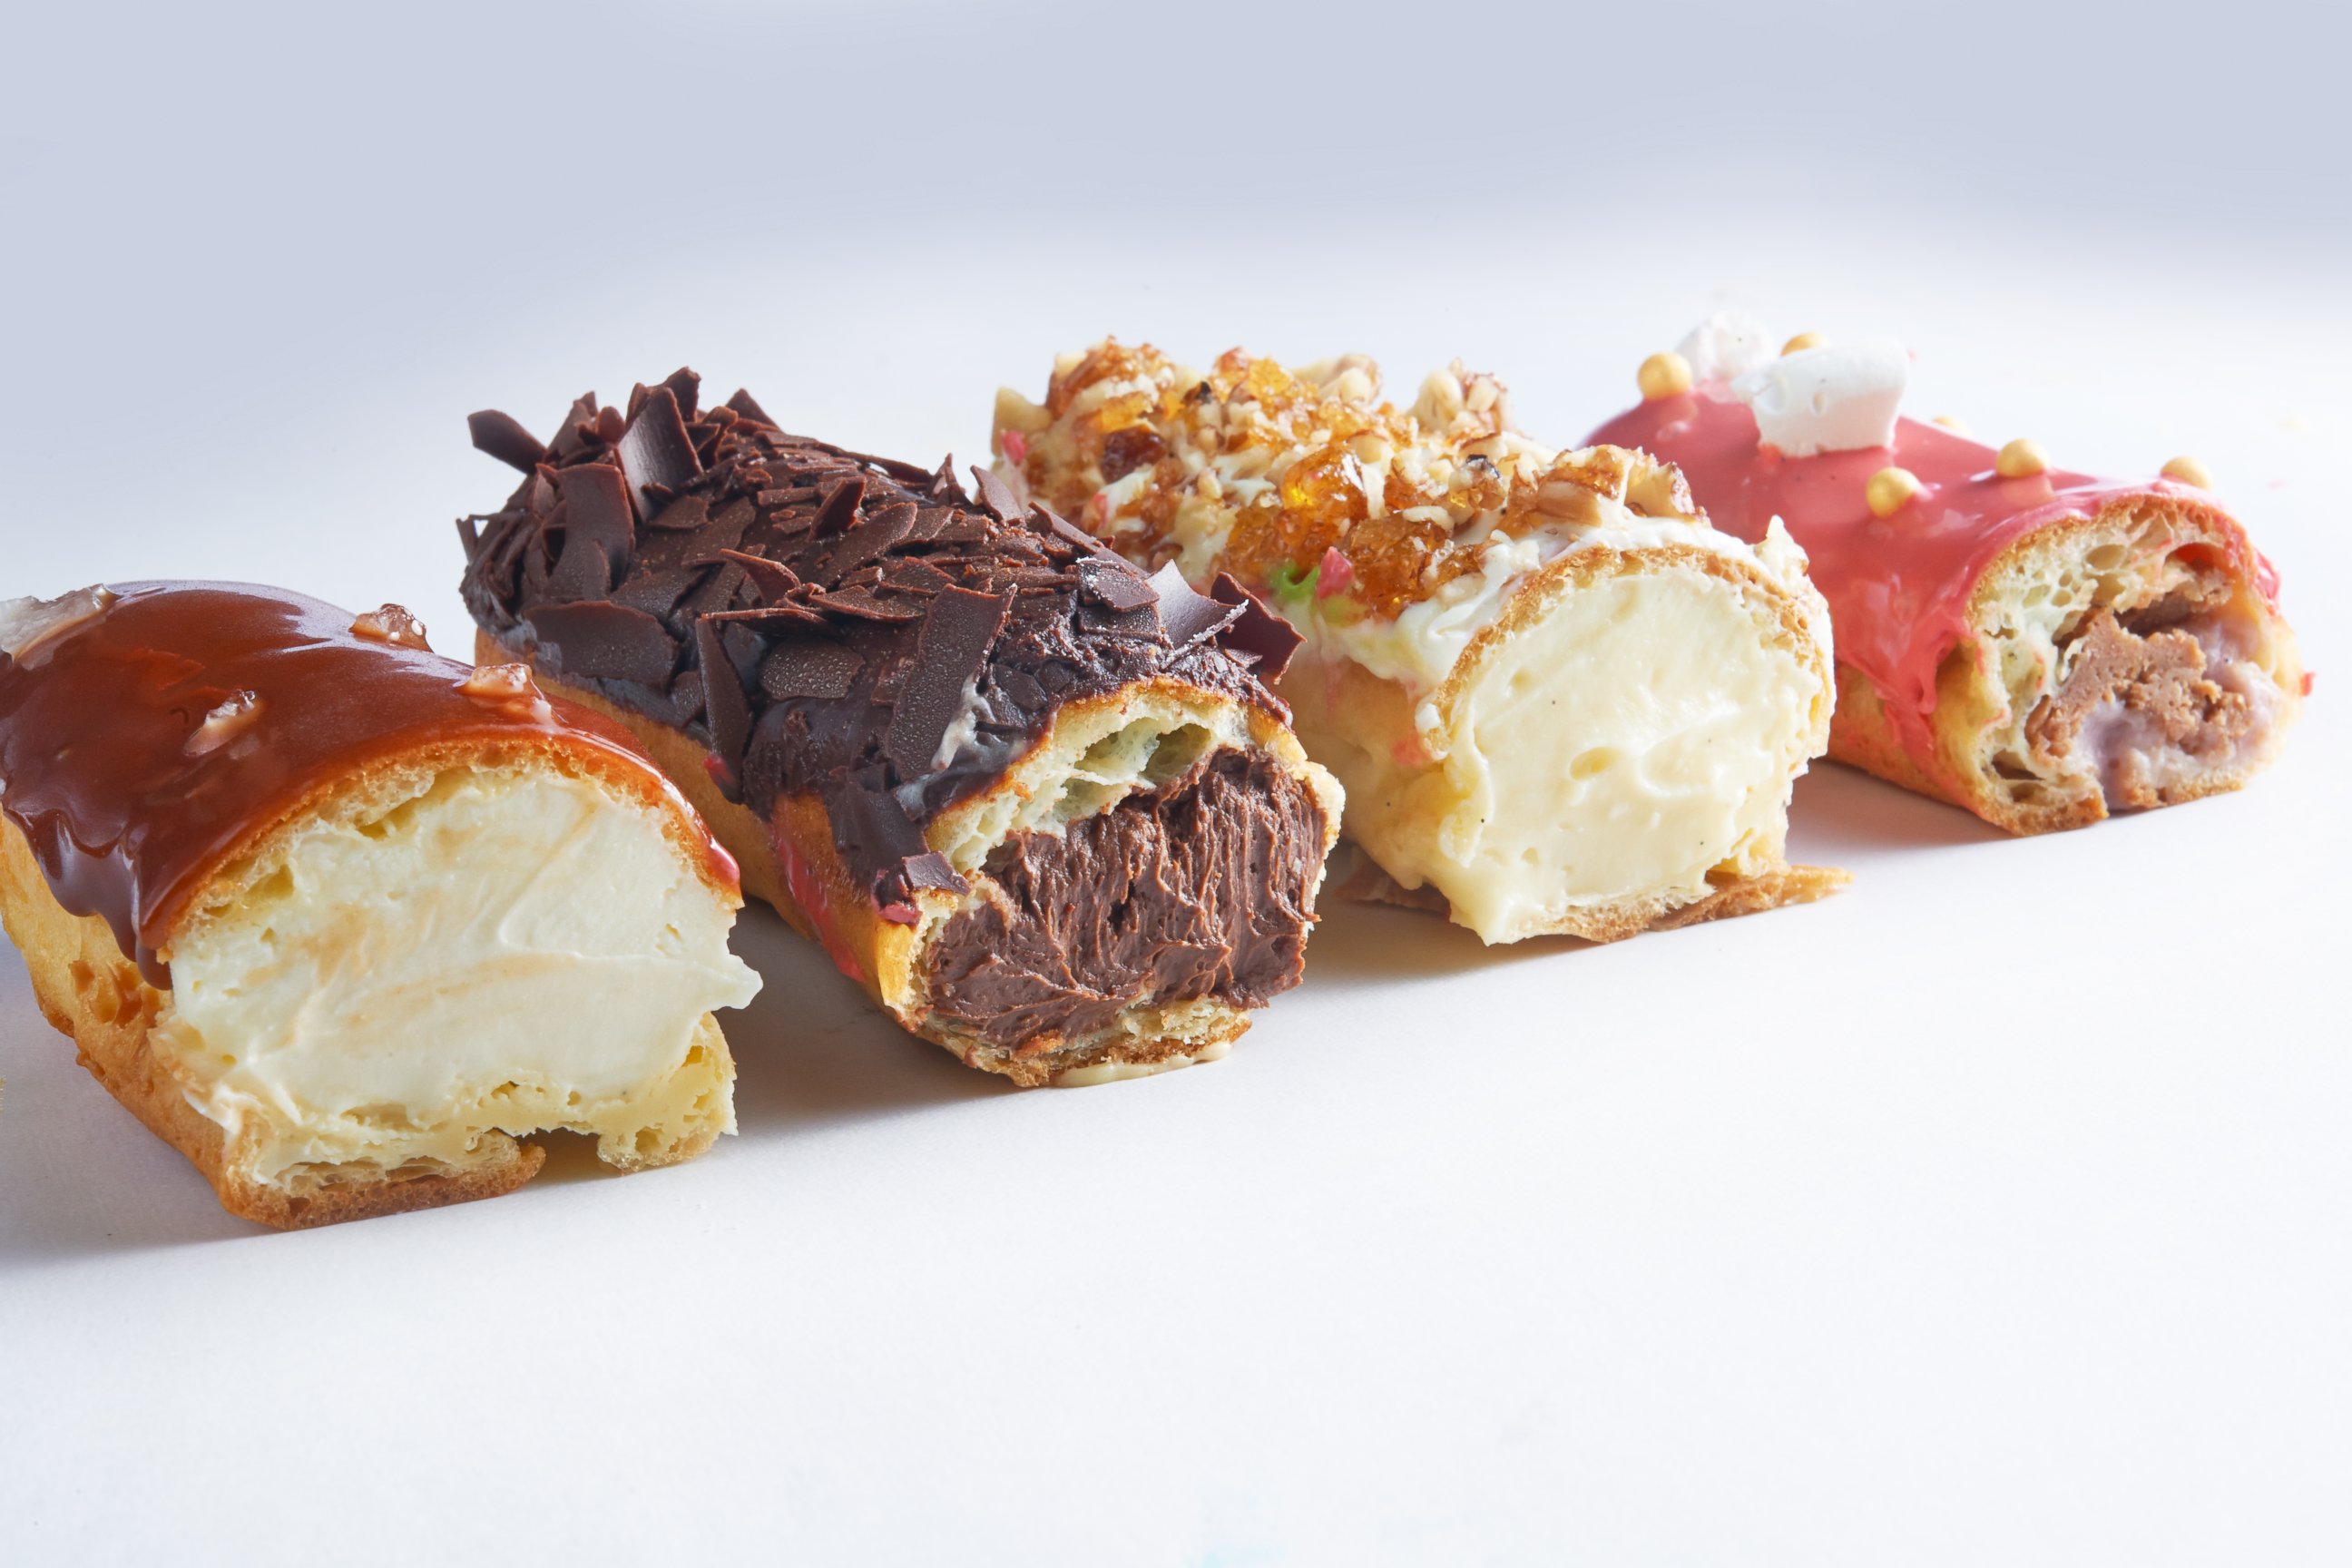 PHOTO: A look inside some recent eclair fillings.